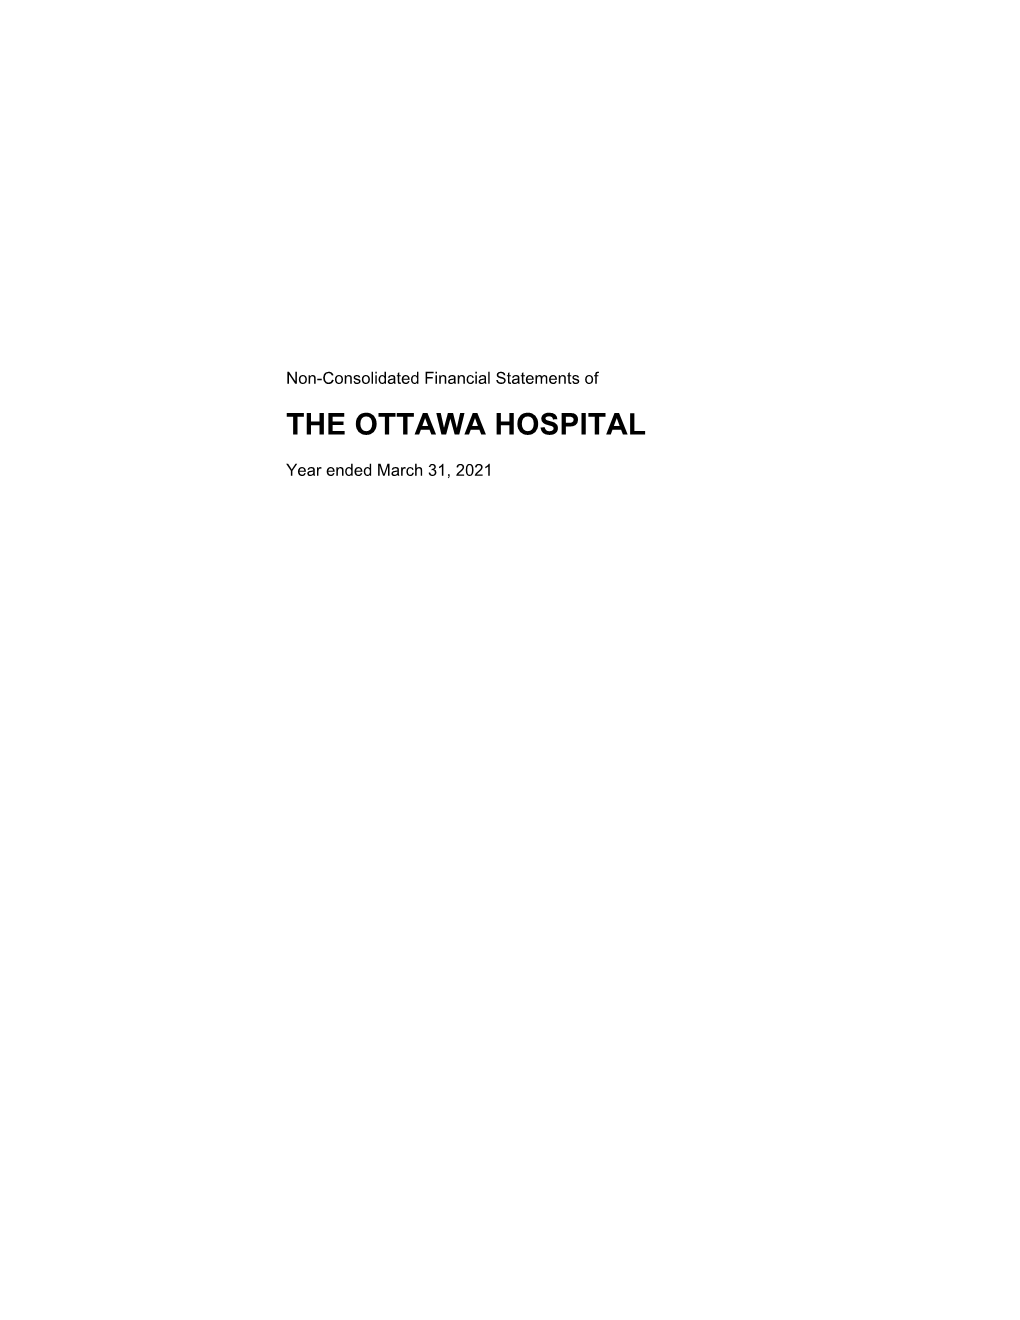 Non-Consolidated Financial Statements of the OTTAWA HOSPITAL